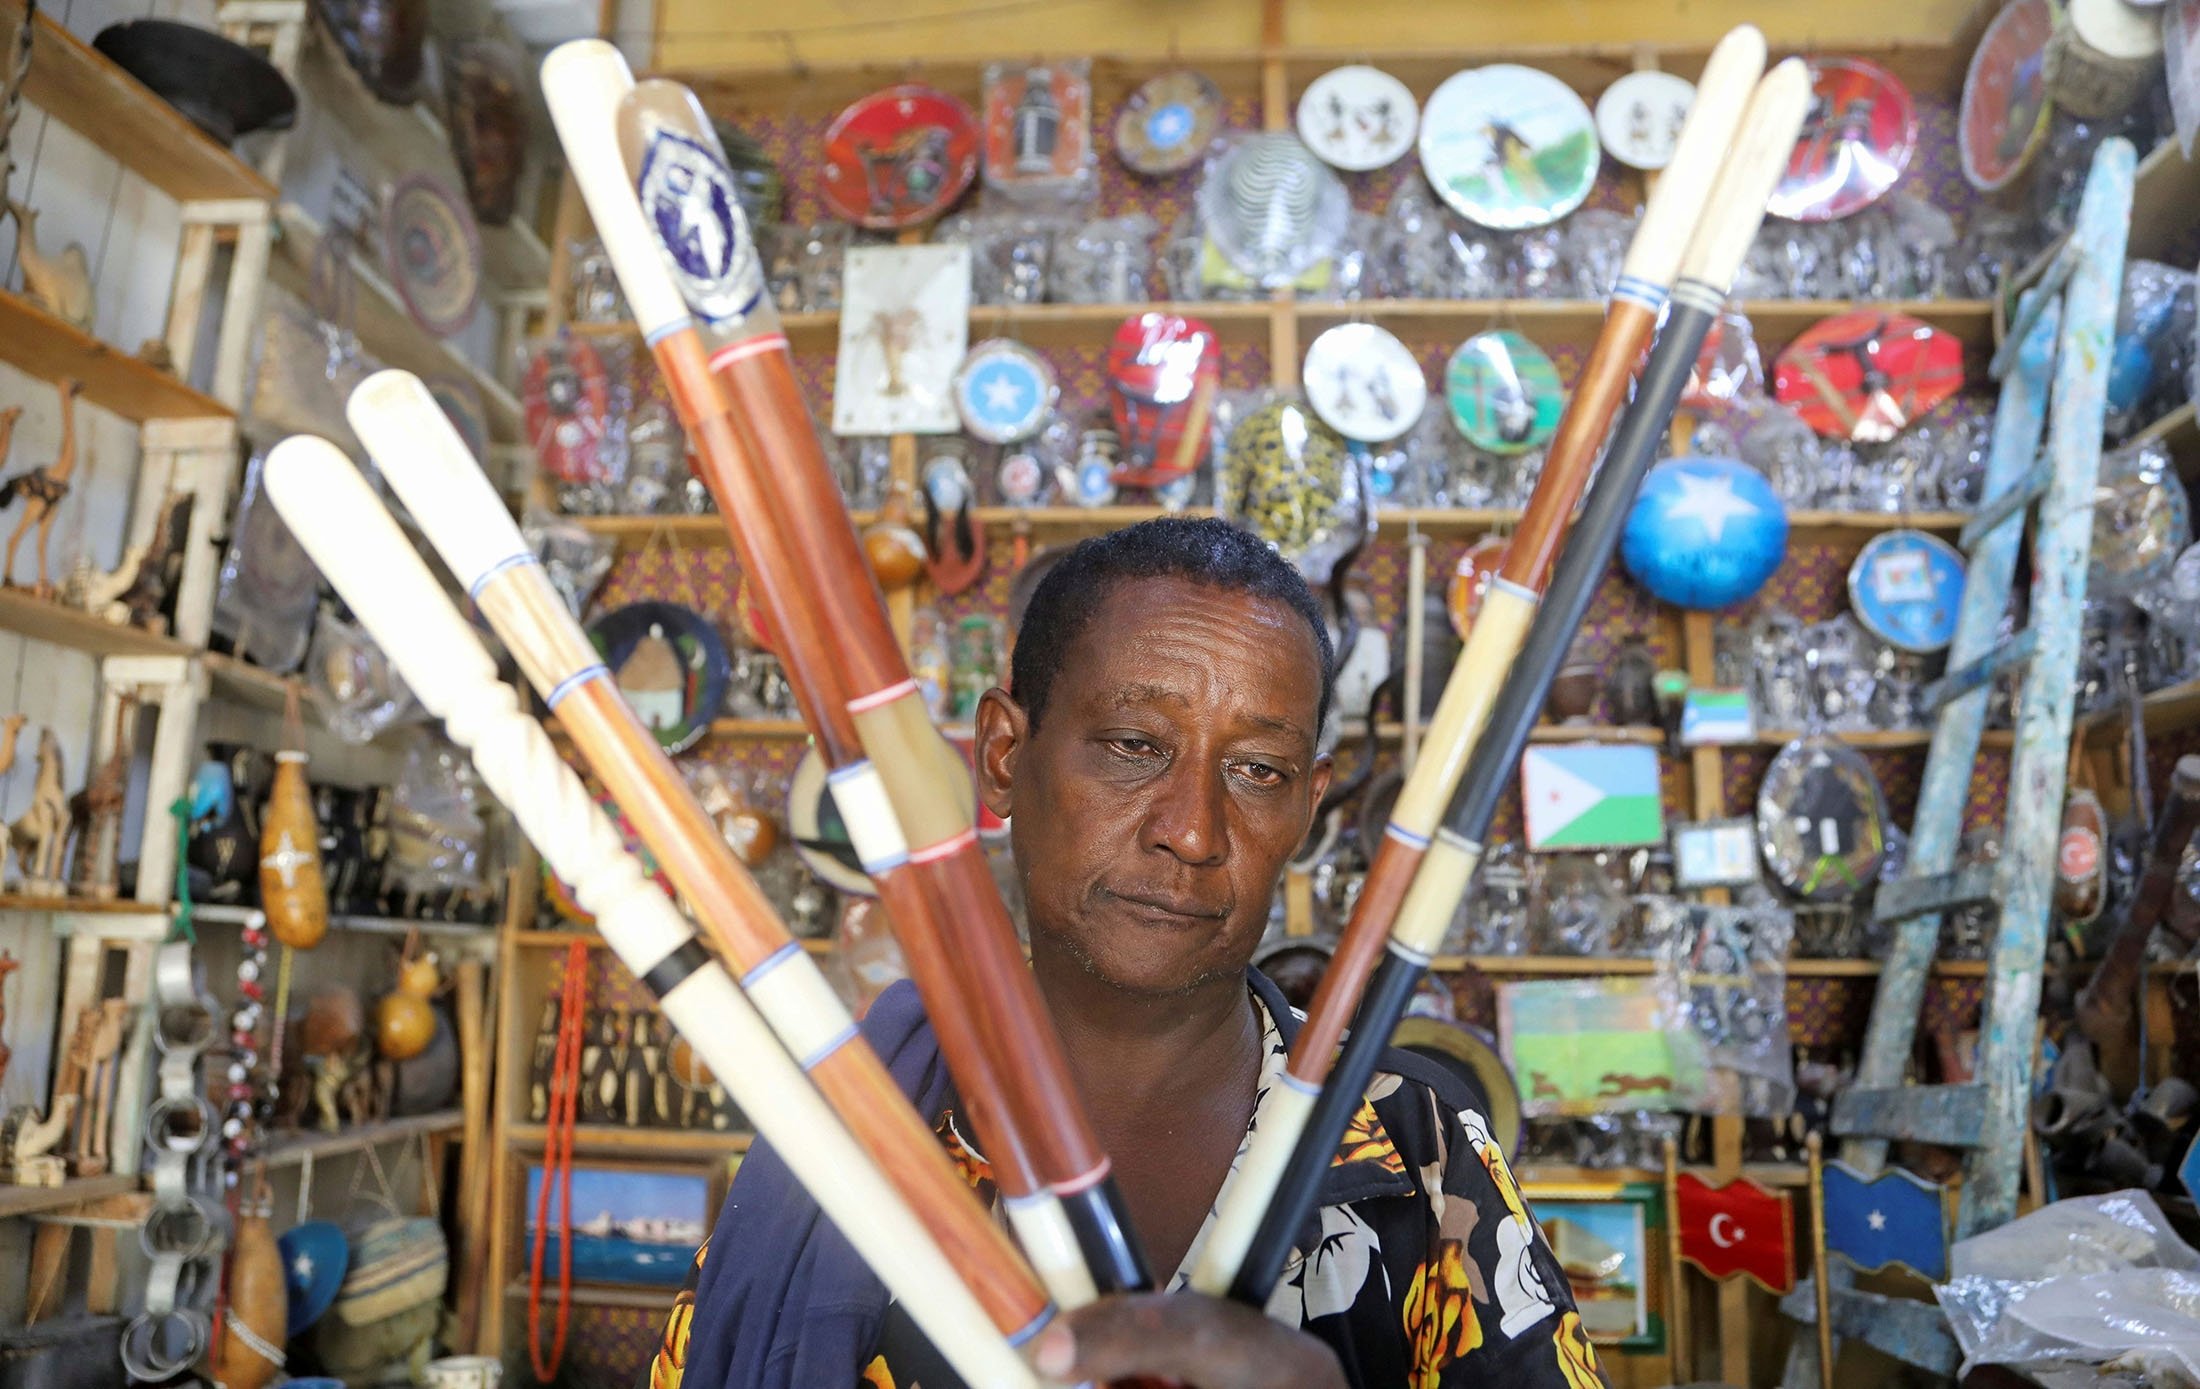 Somalia's artisan Muse Mohamud Olosow, 55, holds police officers' sticks made out of a mixture of wood and camel bones, at his shop in Hamar Jajab district of Mogadishu, Somalia, Oct. 23, 2021. (Reuters Photo)